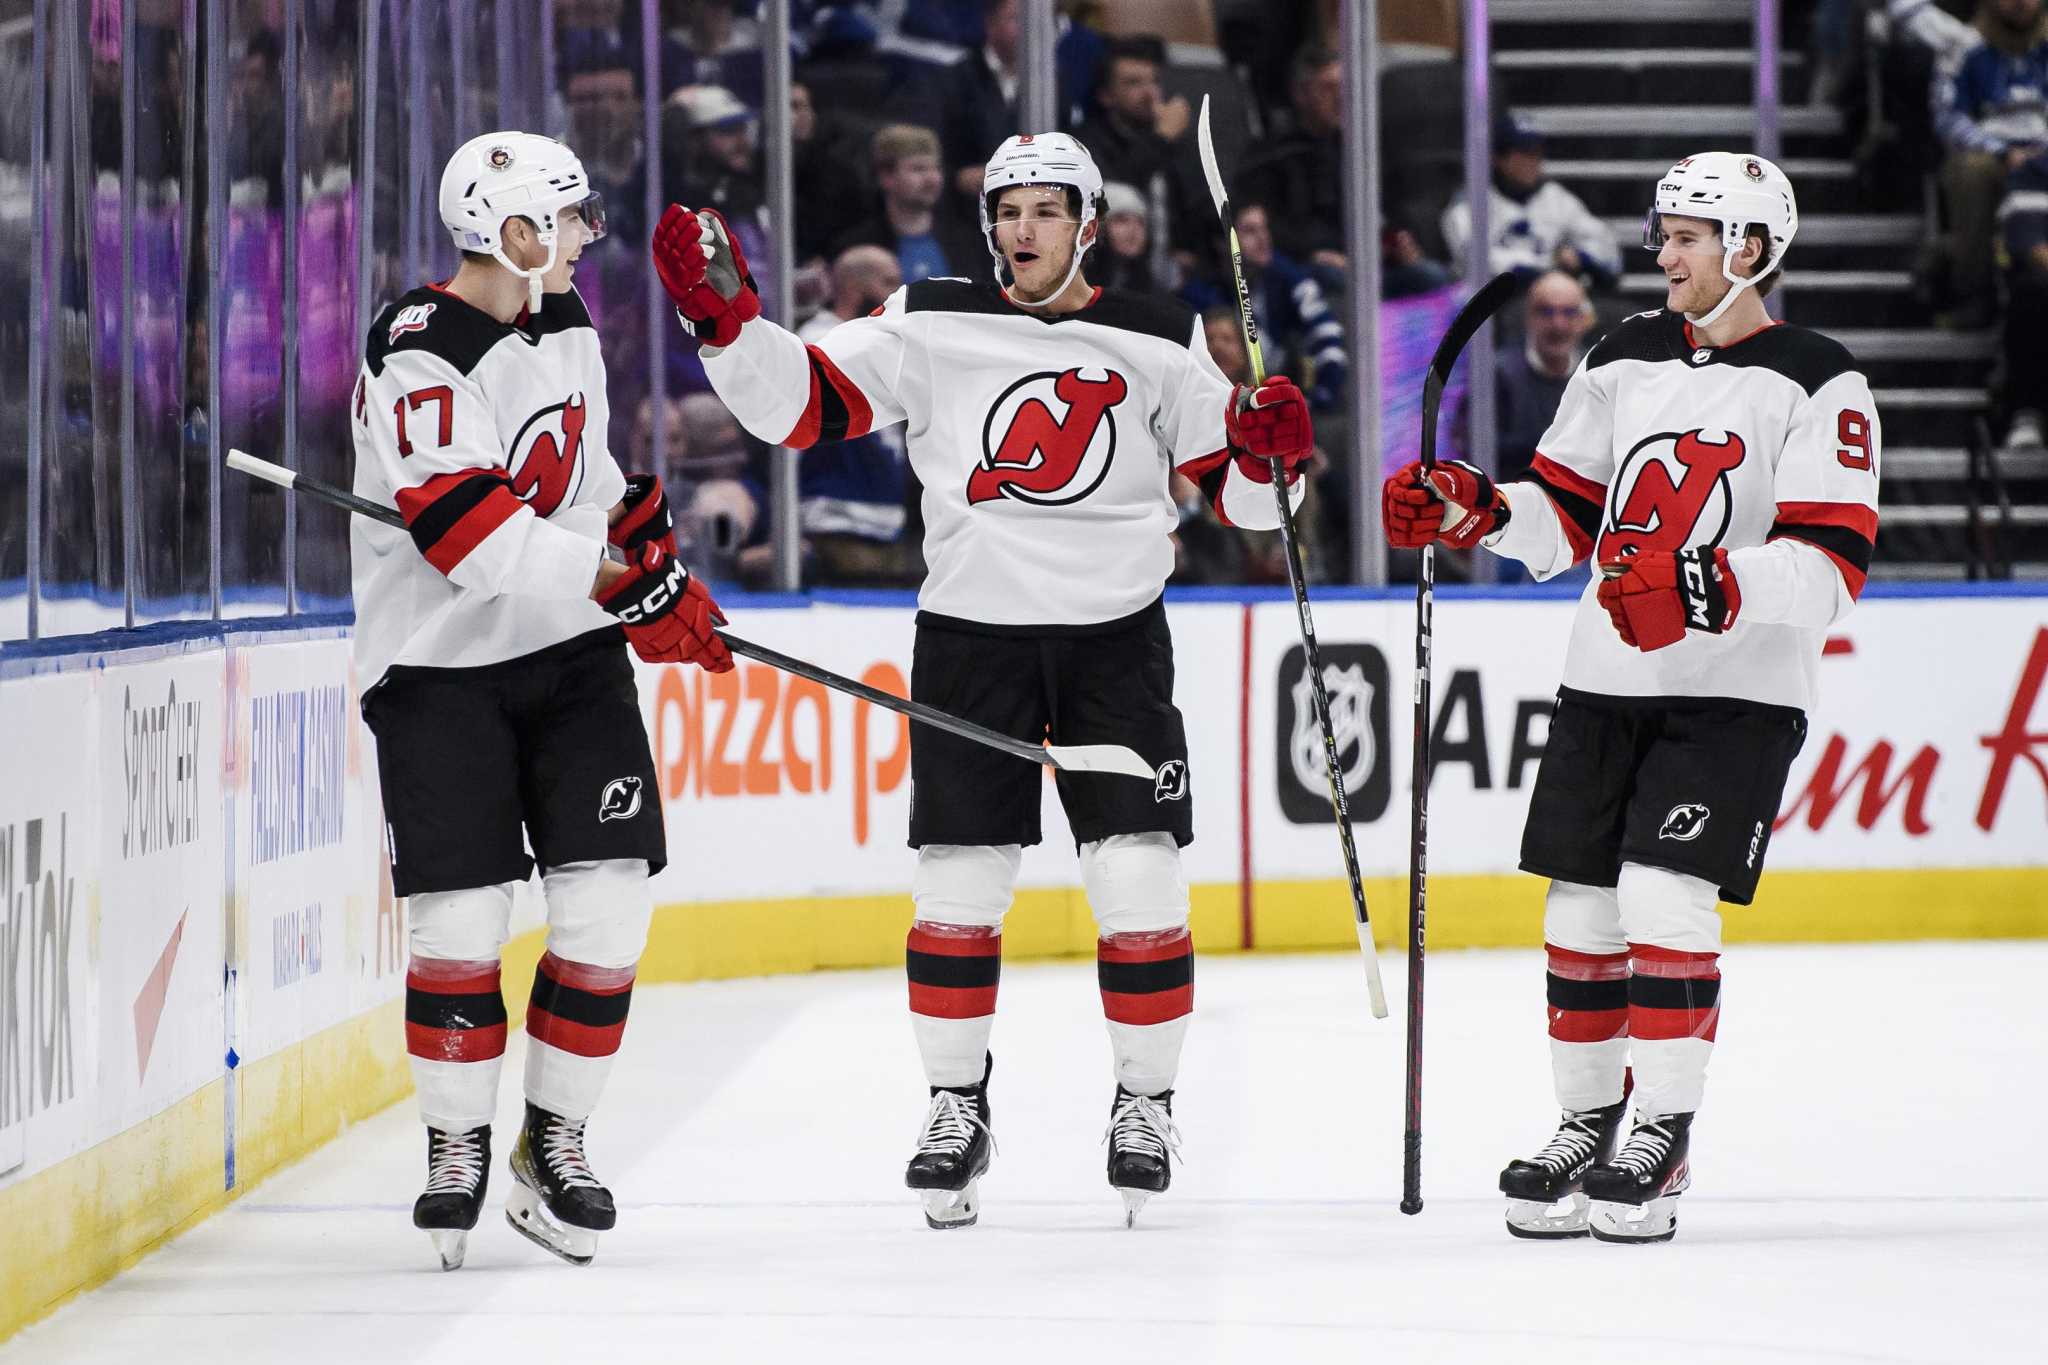 Dawson Mercer shines as his New Jersey Devils take a 3-2 series